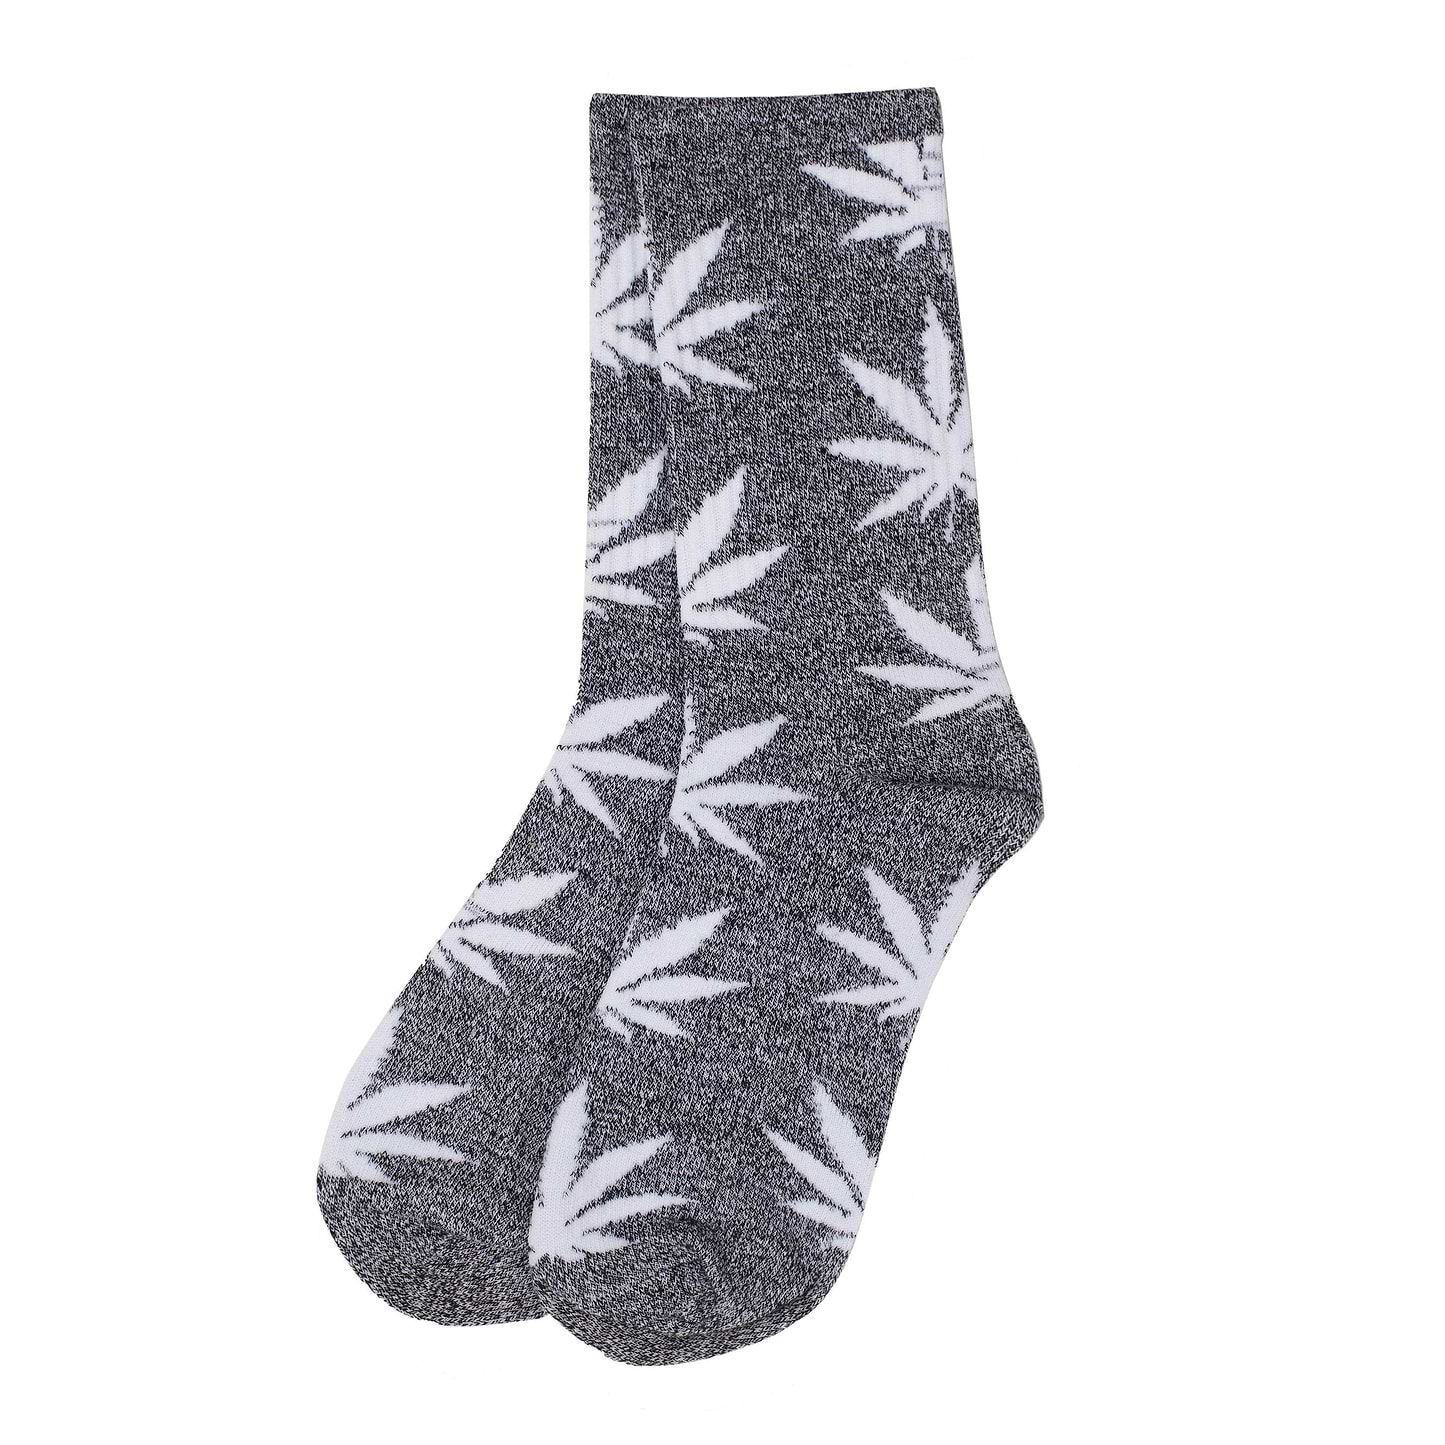 A pair of colorful adult socks footwear with funky Grey Scale weed leaf design